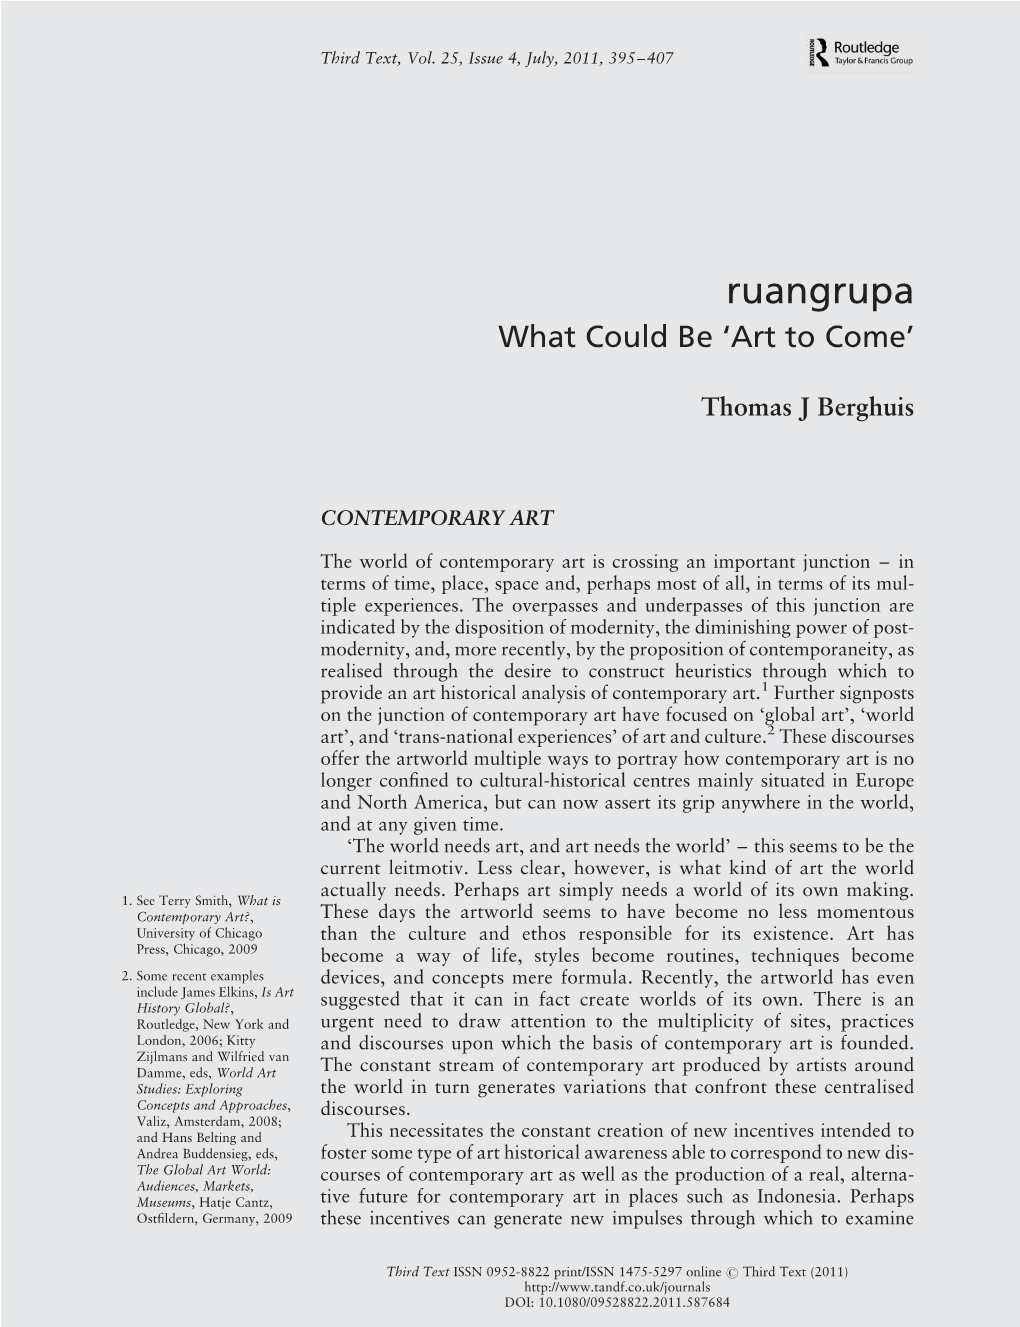 Ruangrupa What Could Be ‘Art to Come’